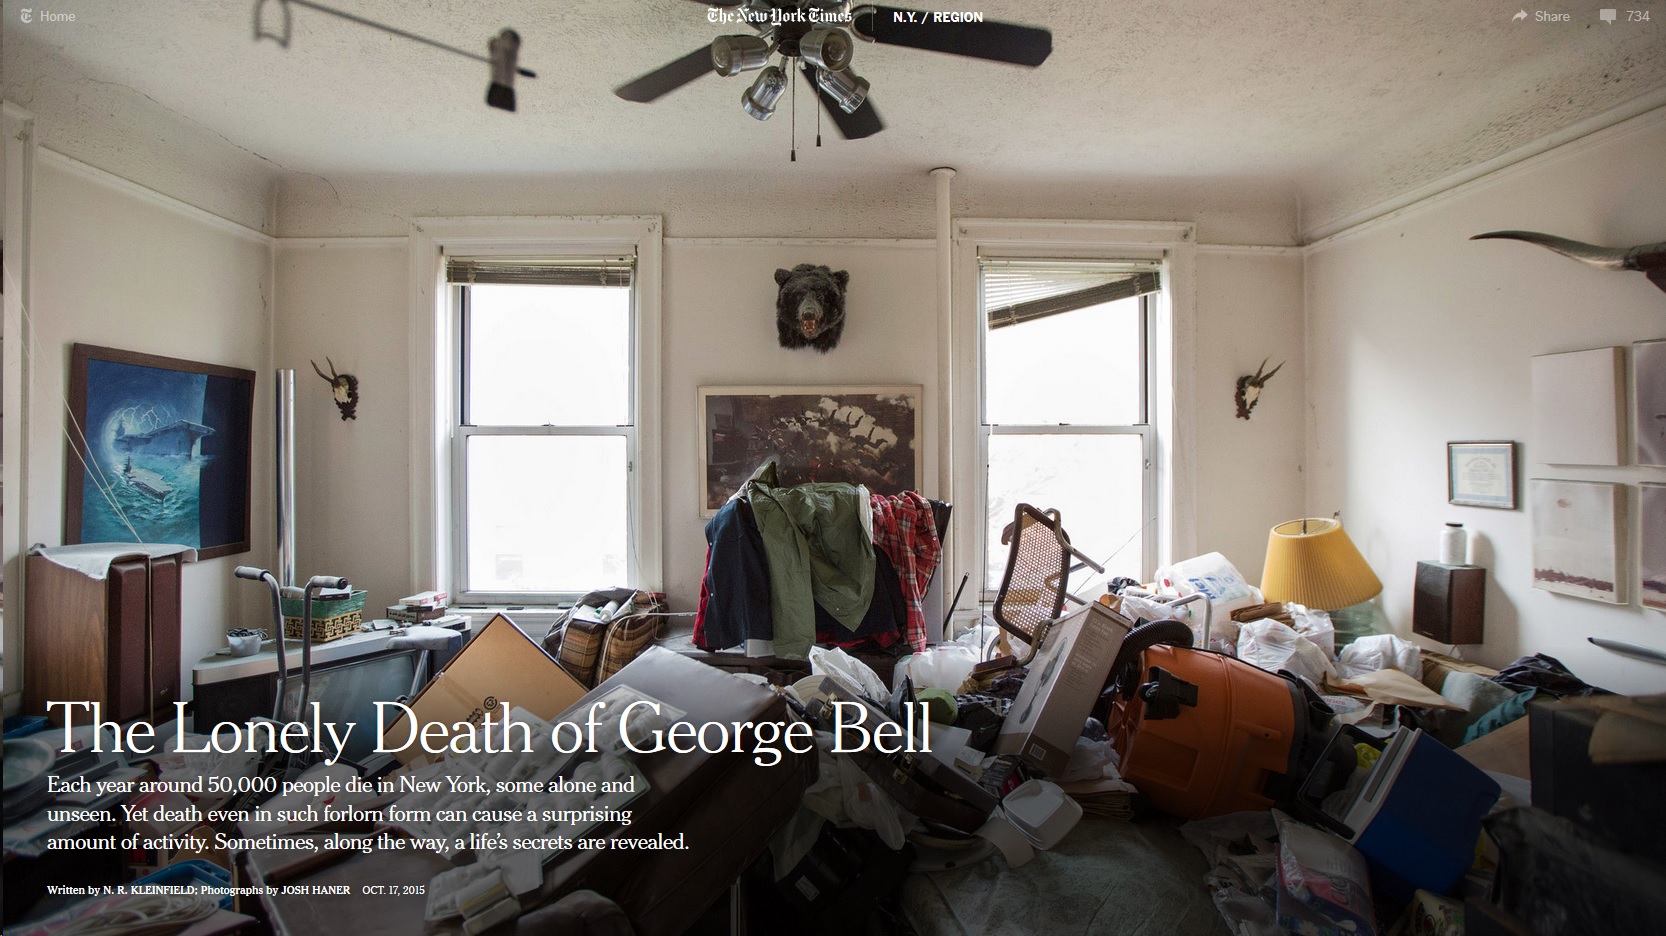 The Lonely Death of George Bell - The New York Times